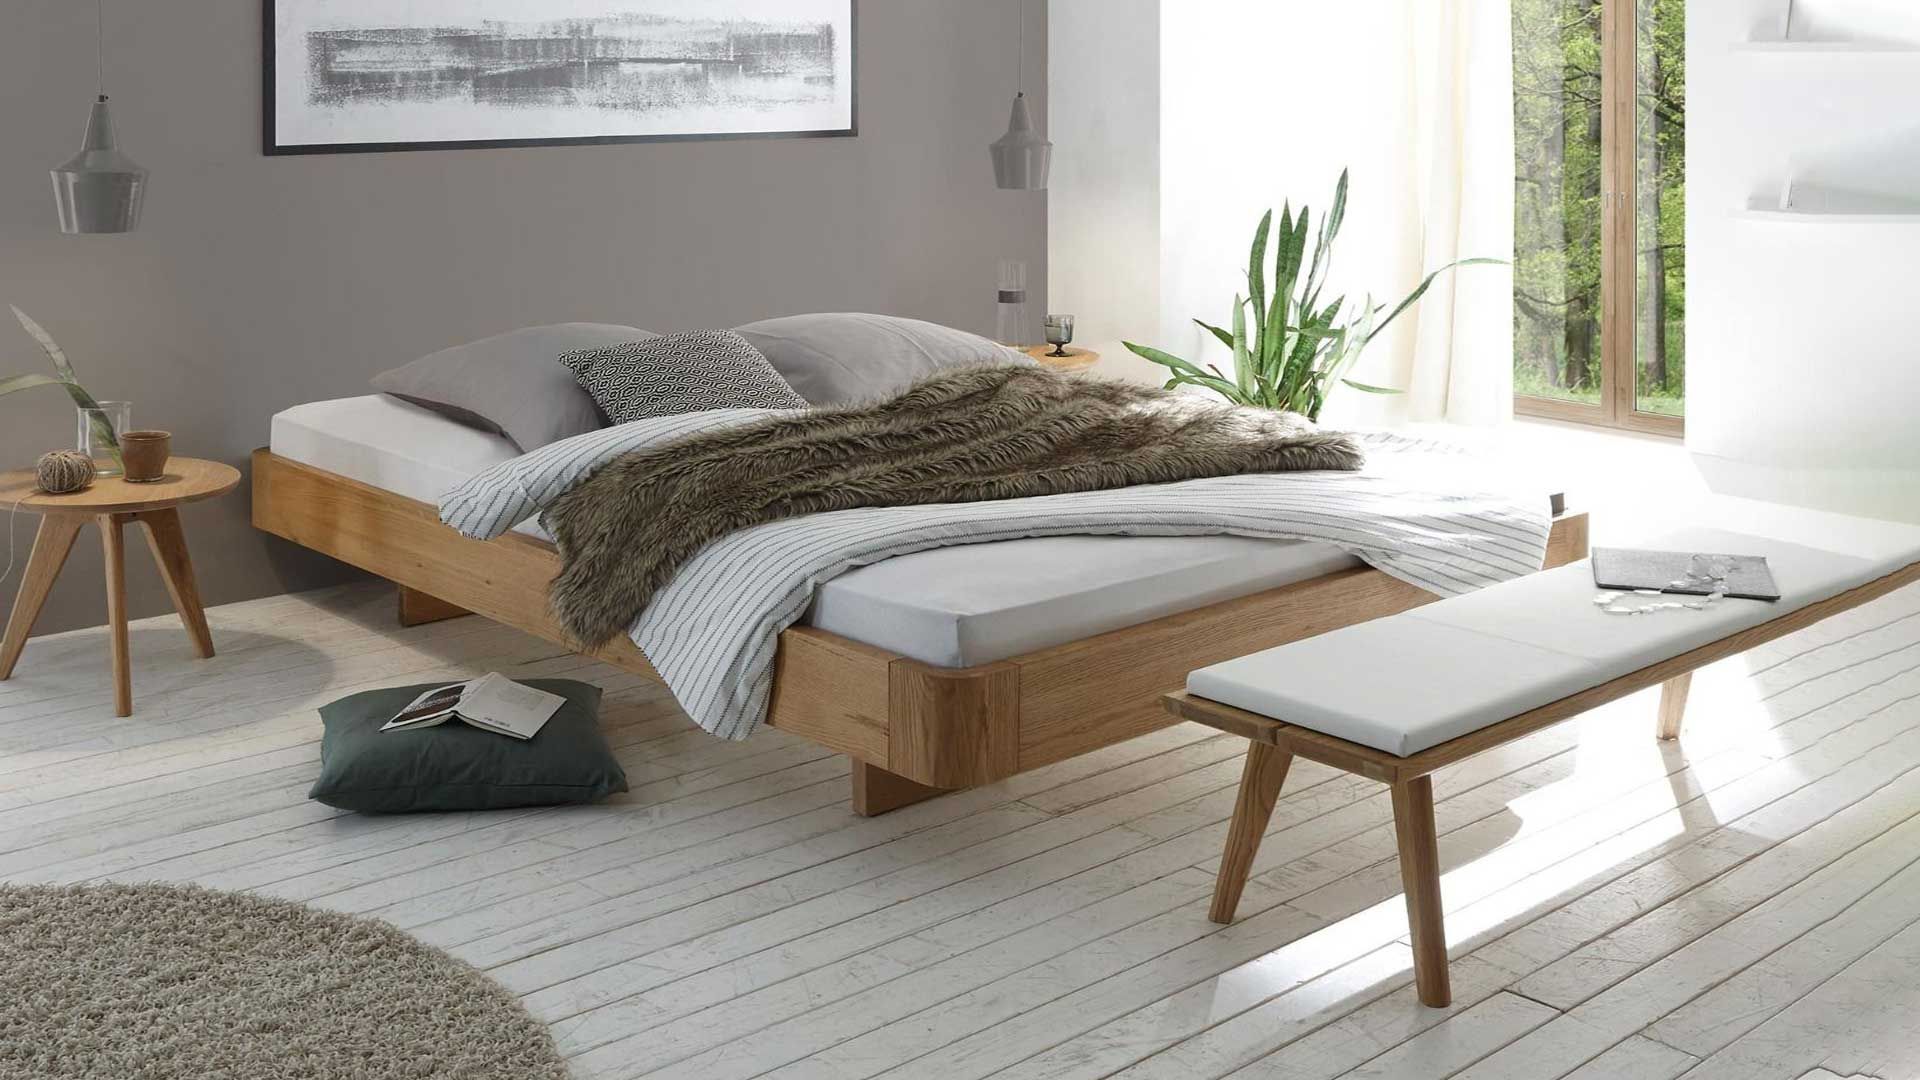 The Floating Bed Airo Striking In, Floating Bed Frame